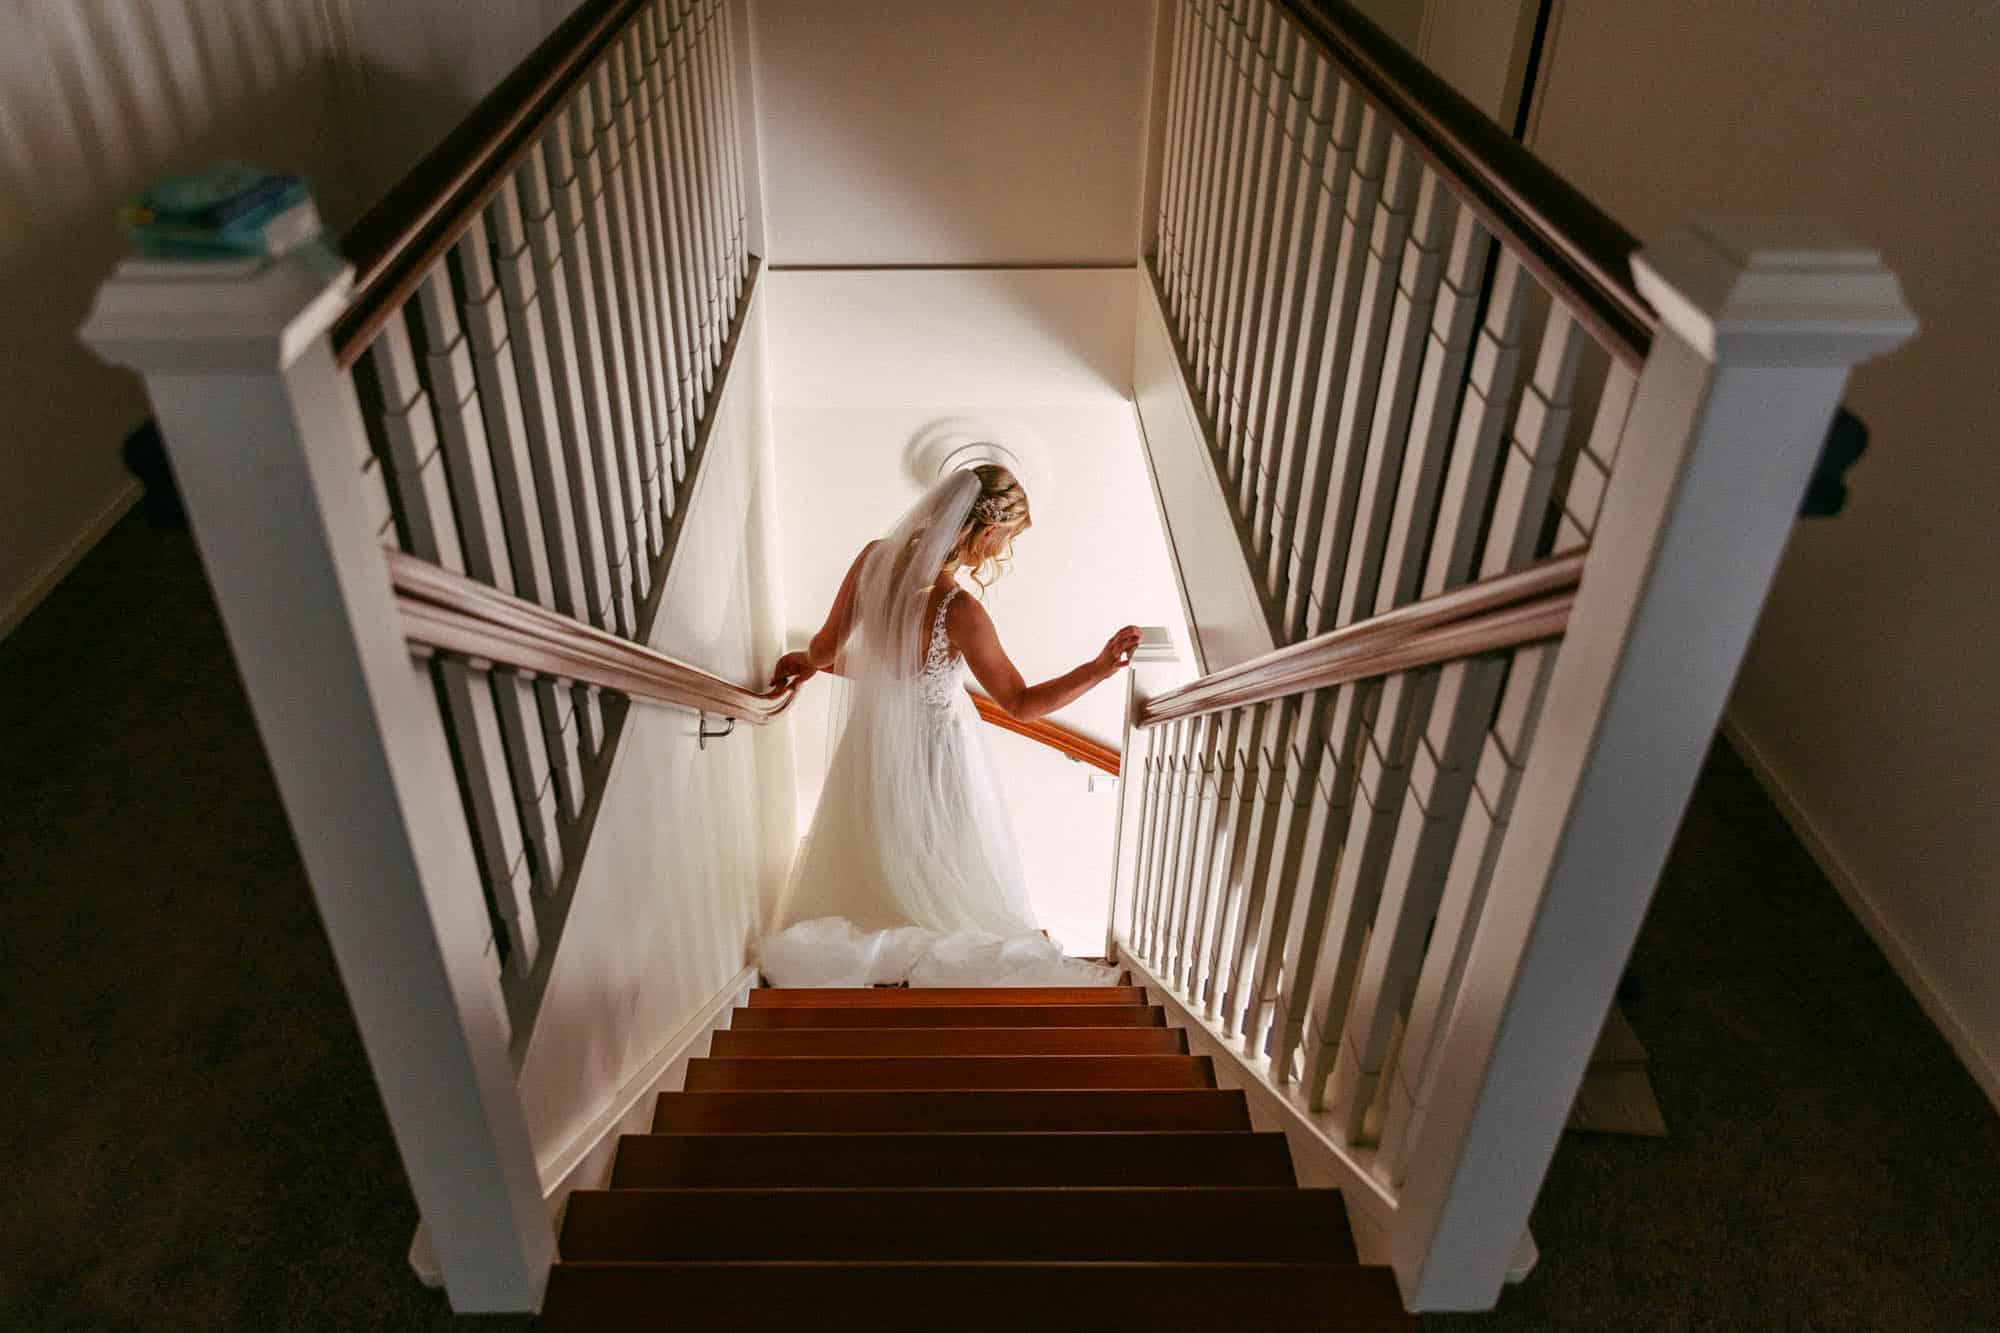 A bride gracefully descends the stairs in her wedding dress during betrothal.